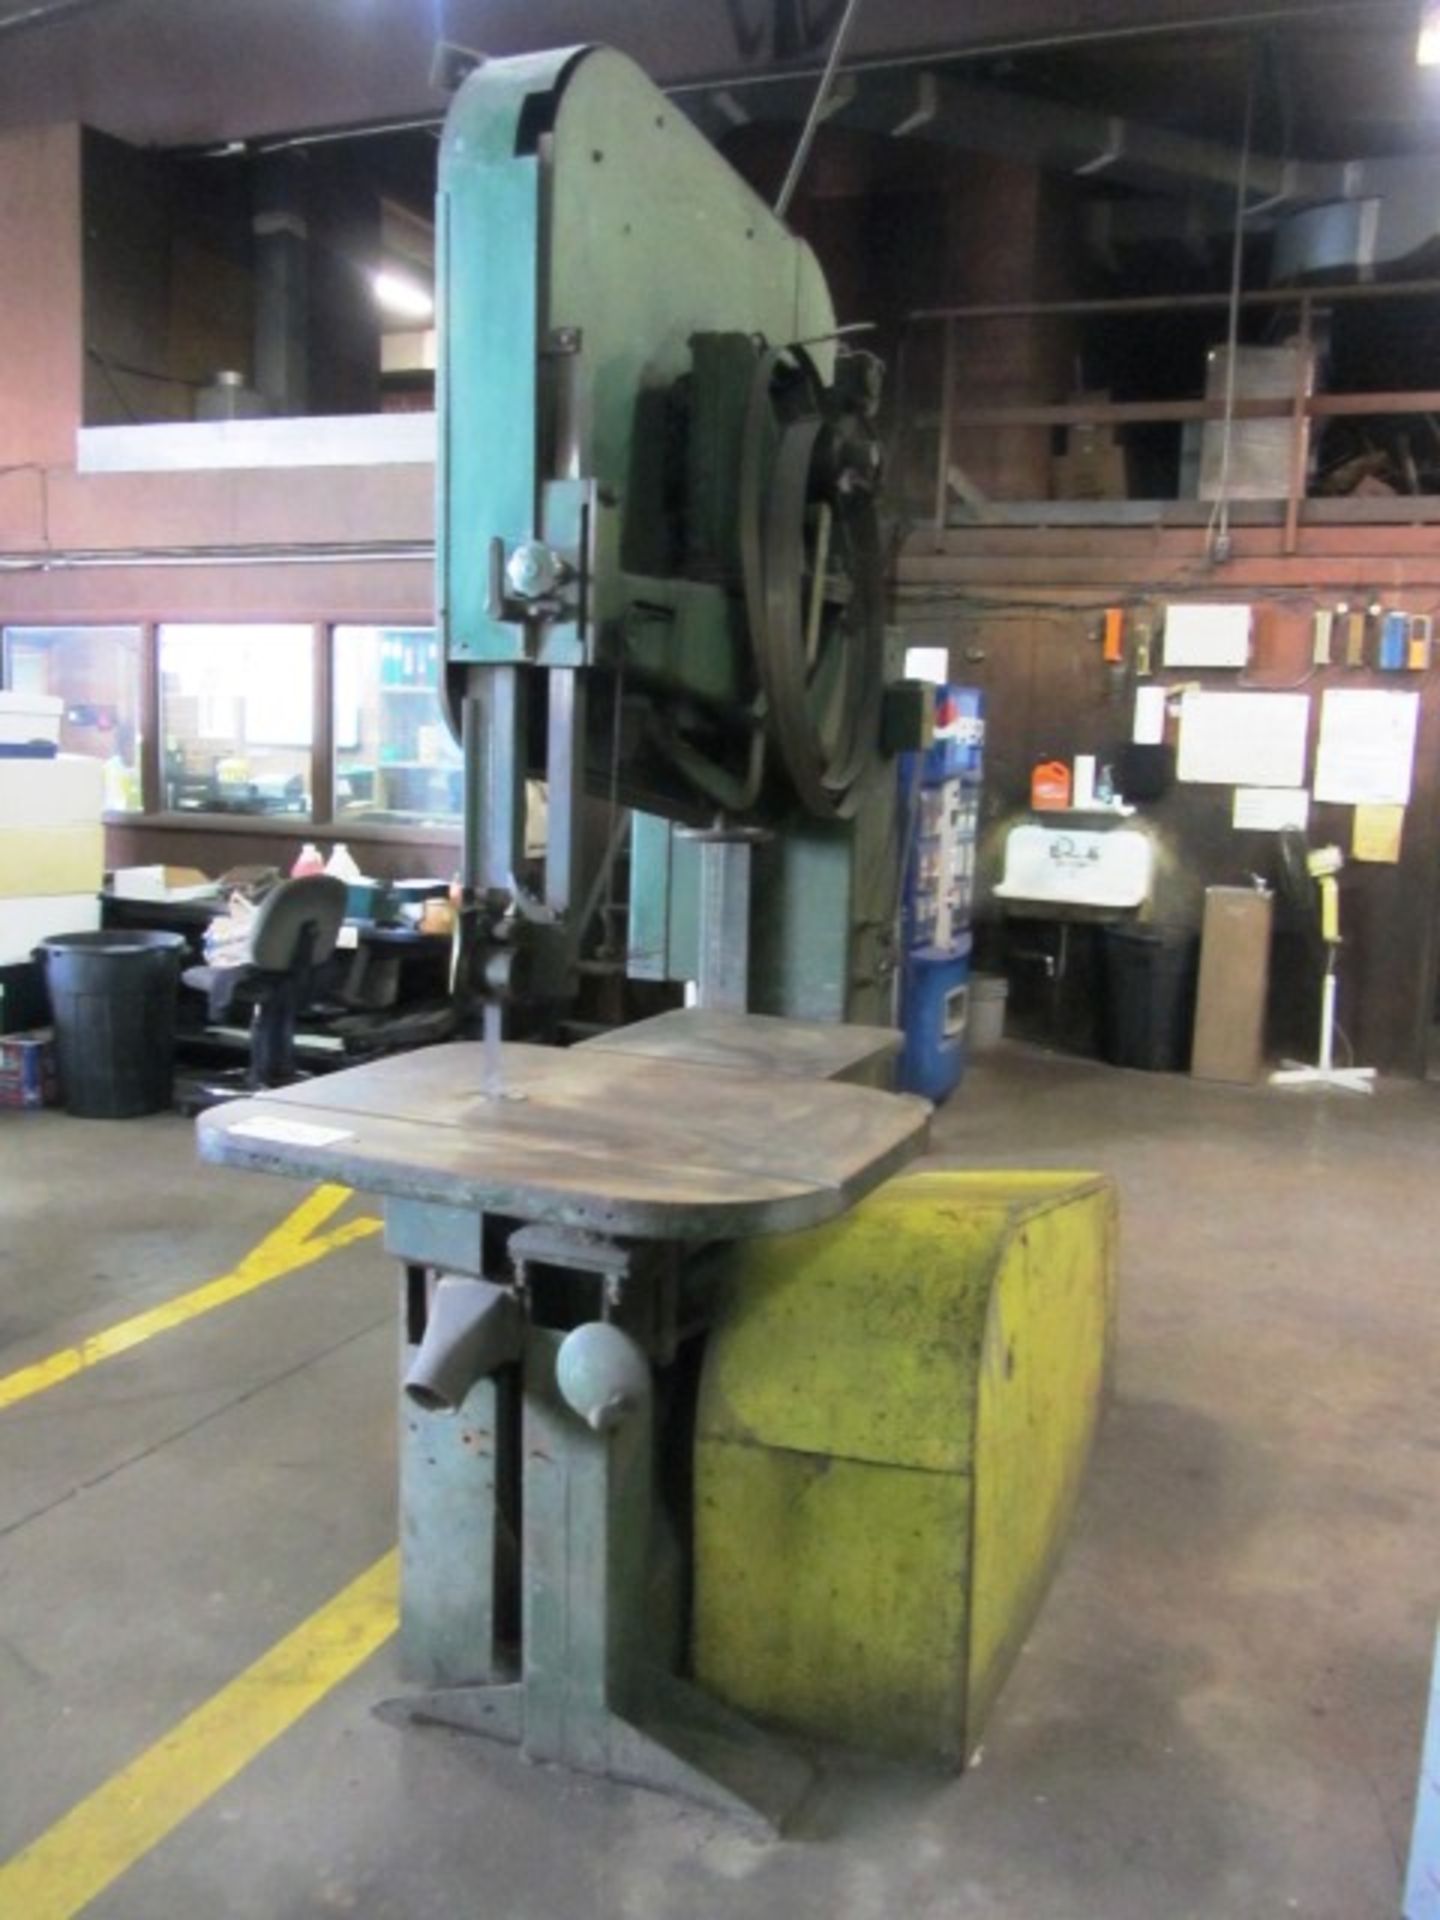 Do-All 35'' Vertical Bandsaw with 31'' x 36'' Worktable, Variable Blade Speeds, sn:31-50187 - Image 4 of 6